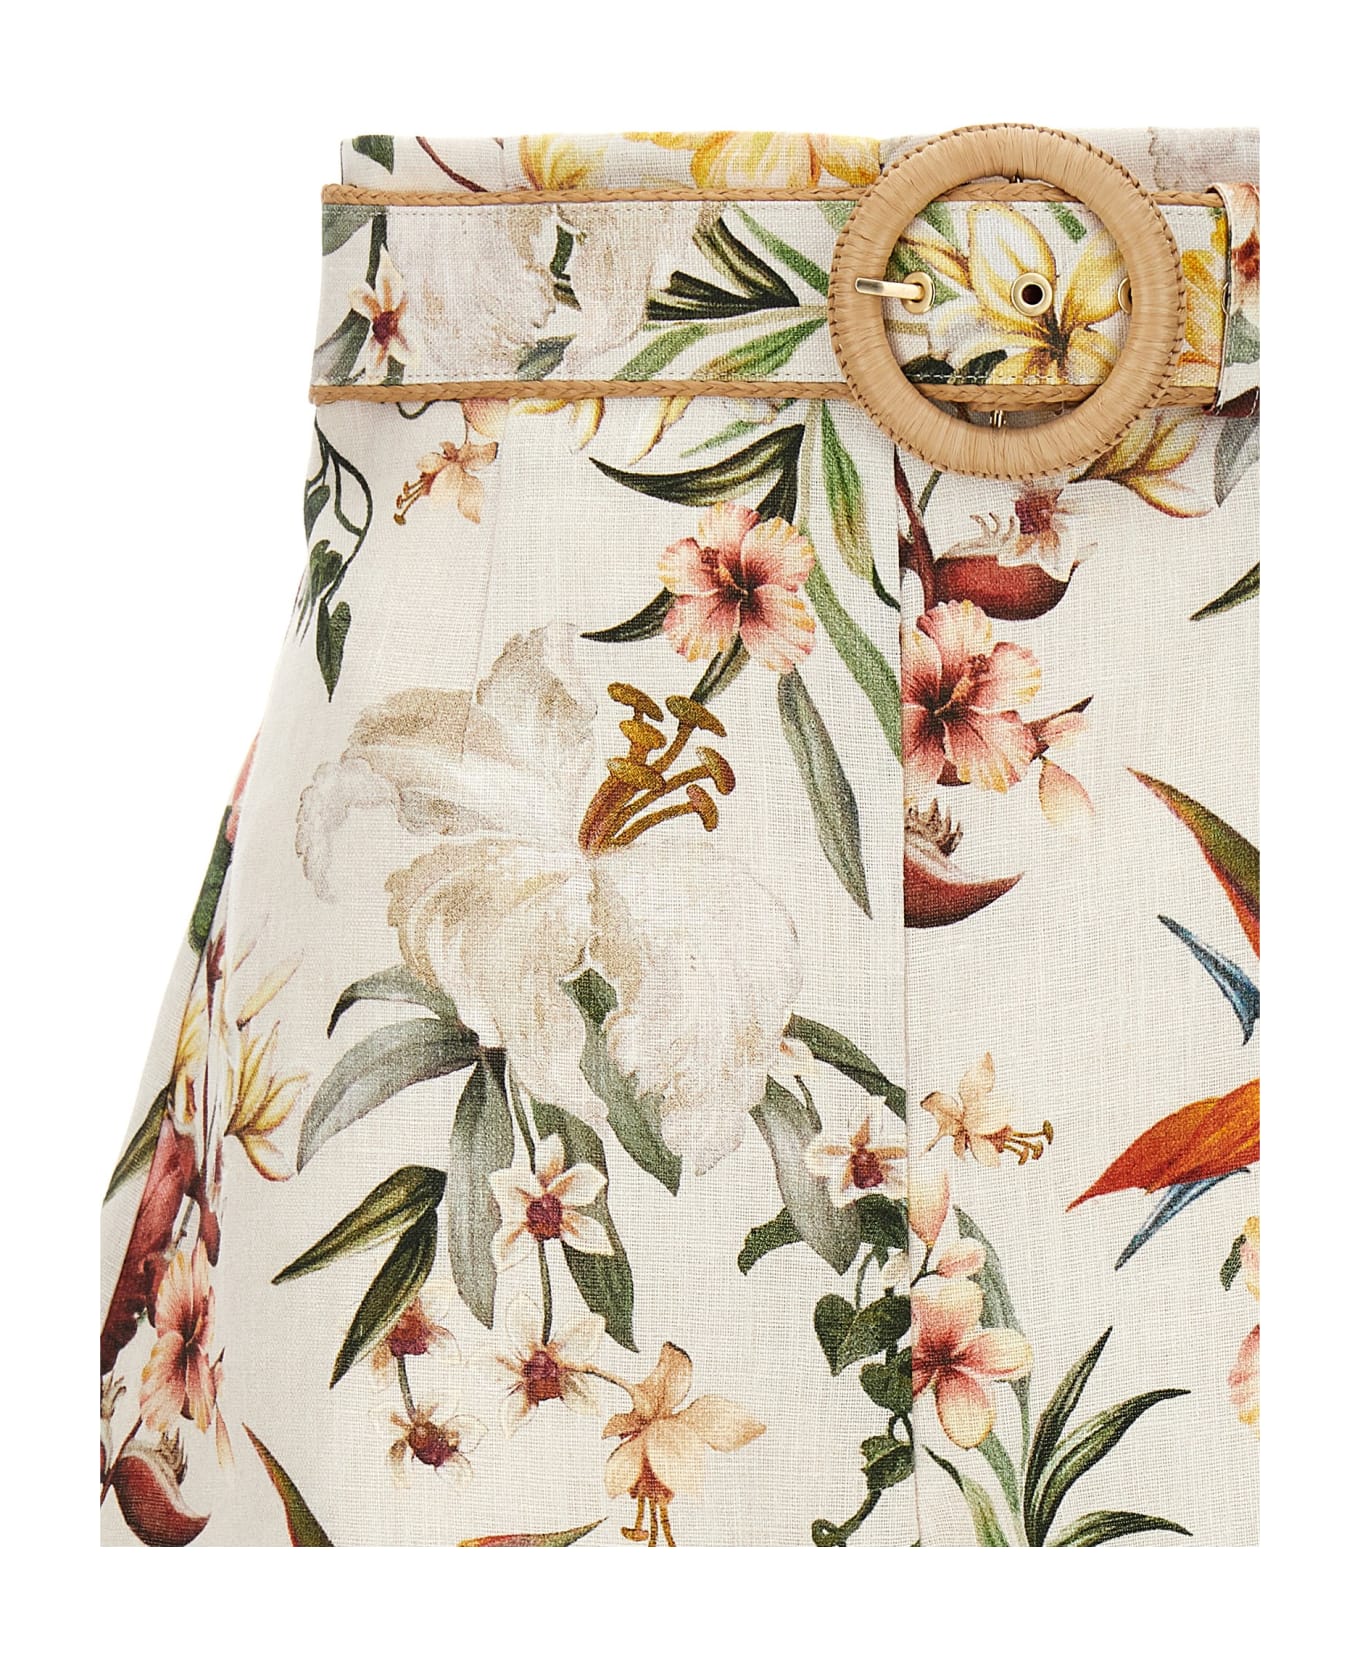 Zimmermann 'lexi Fitted' Shorts - Multicolor